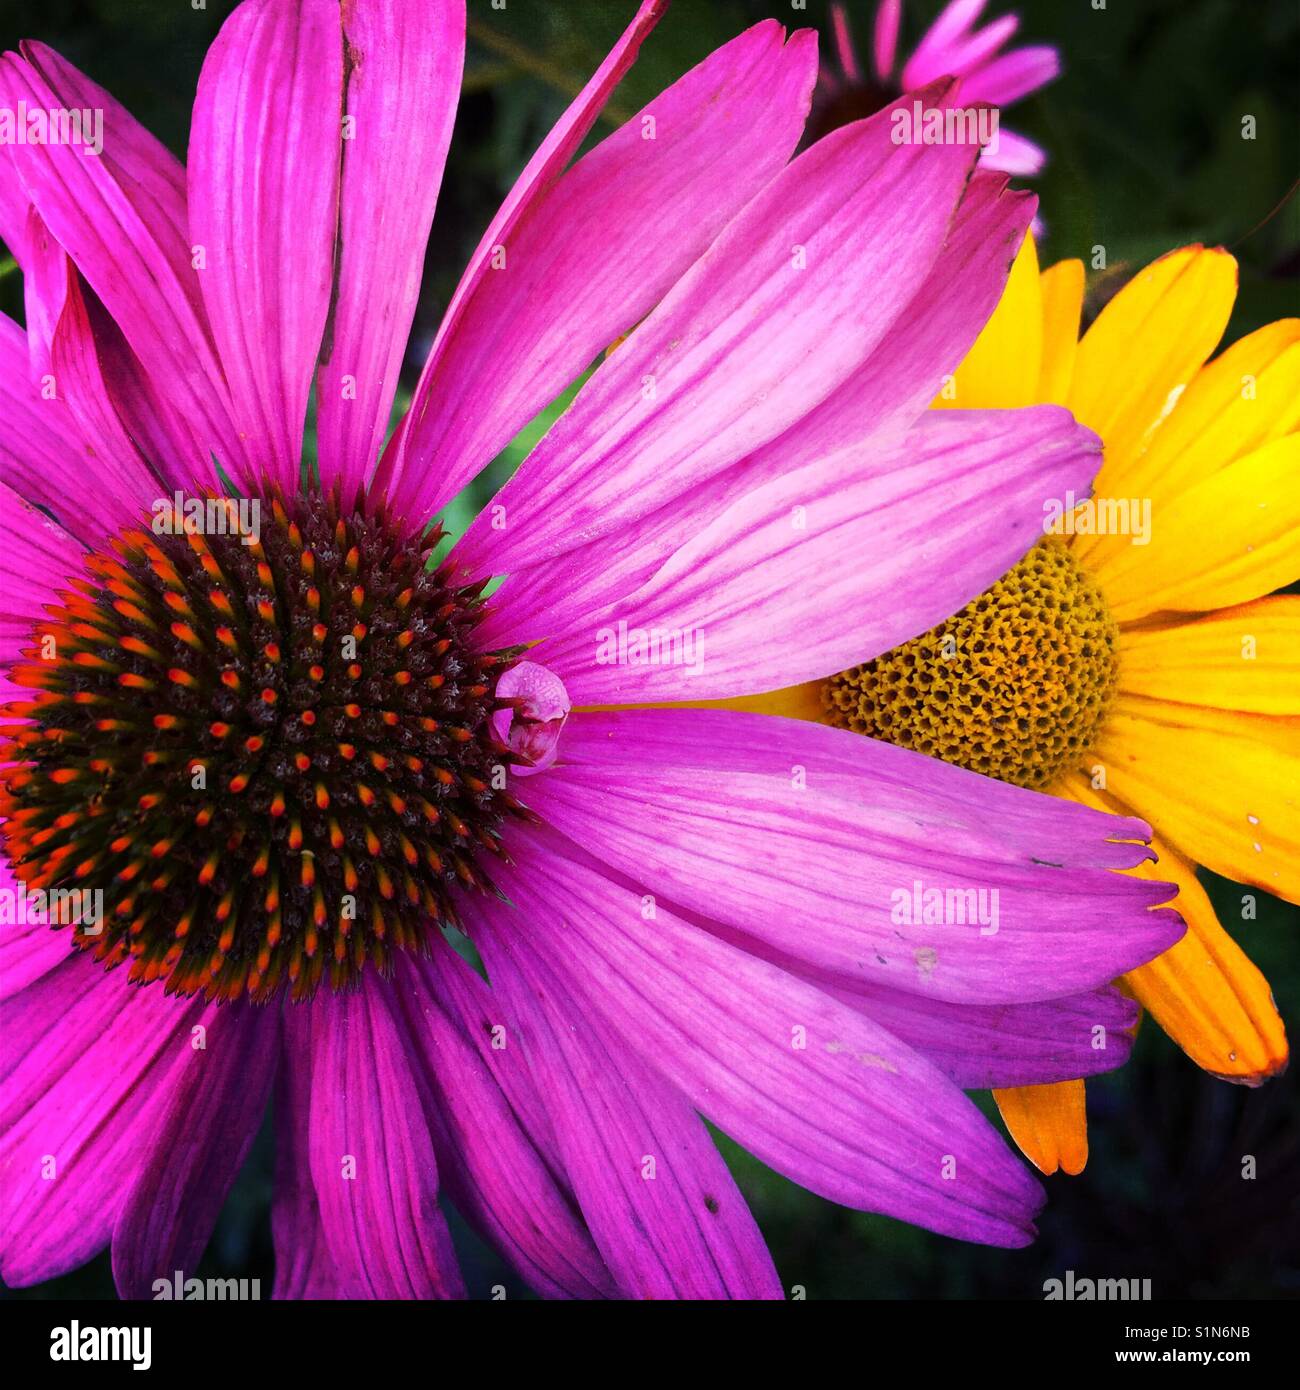 A close up detail shot of late summer flowers Stock Photo